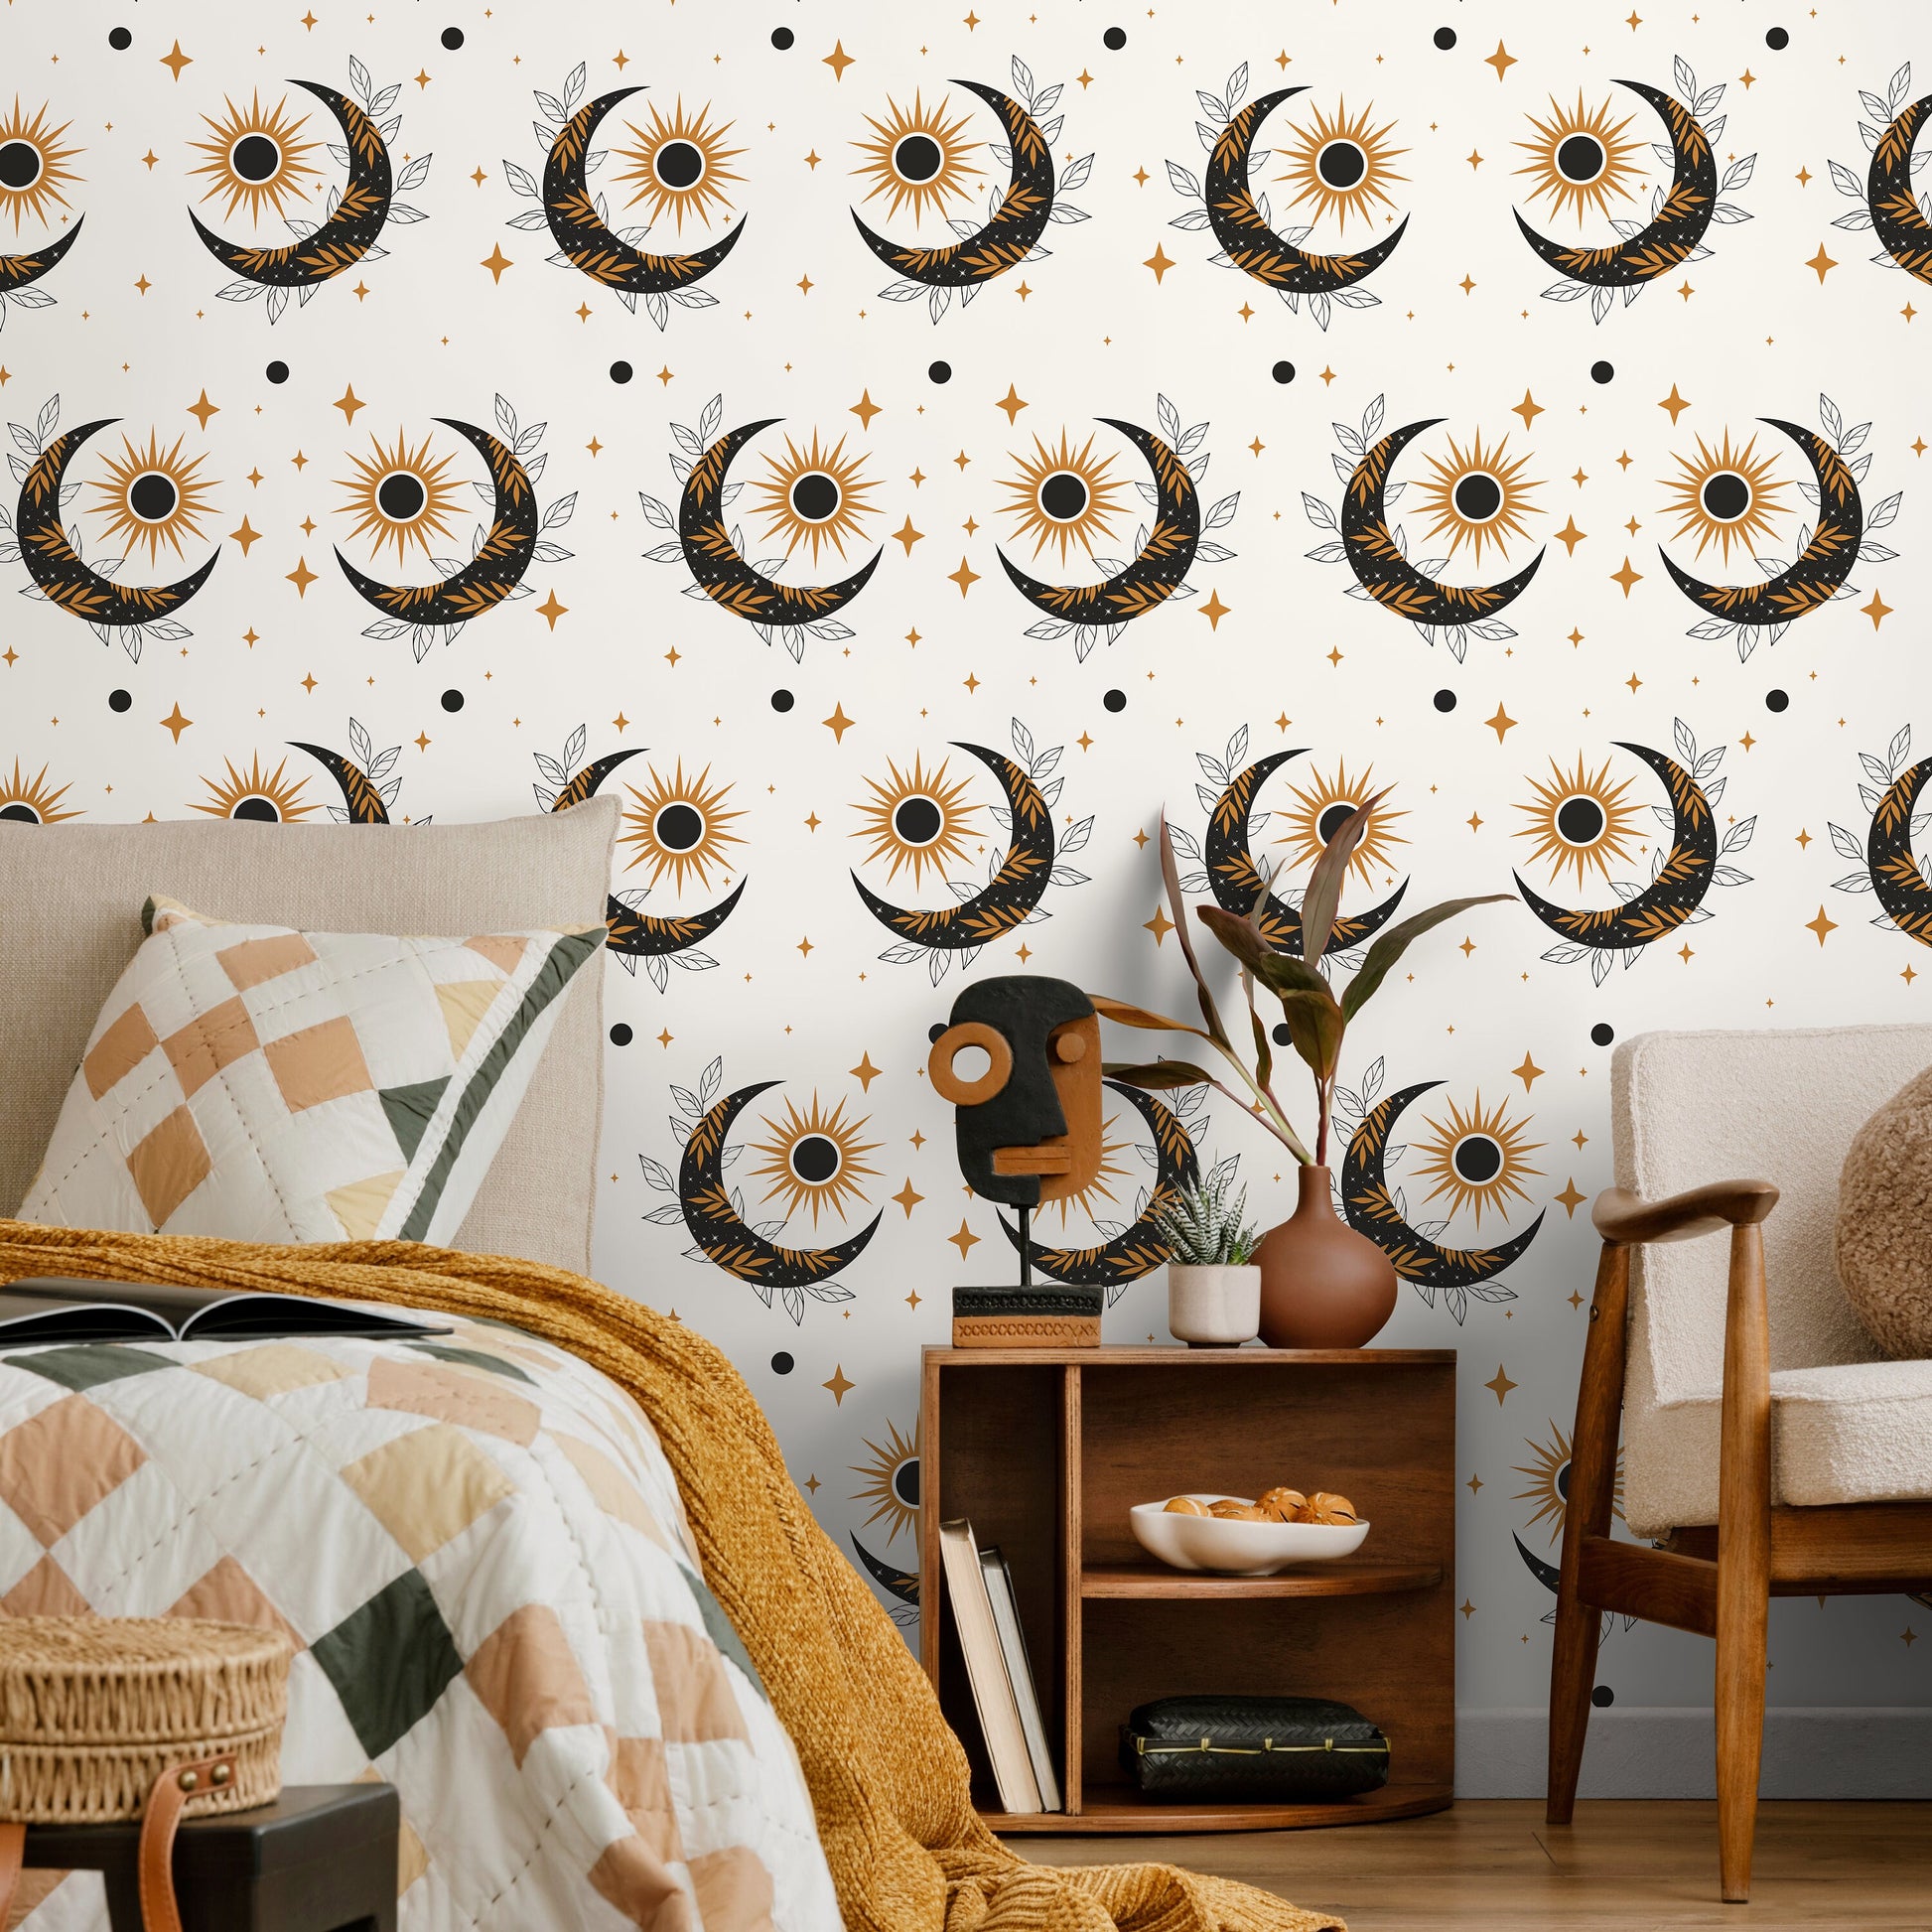 Mystique and Celestial Wallpaper Removable Peel and Stick Wallpaper, Peel and Stick Wallpaper Moon and Sun - ZACS